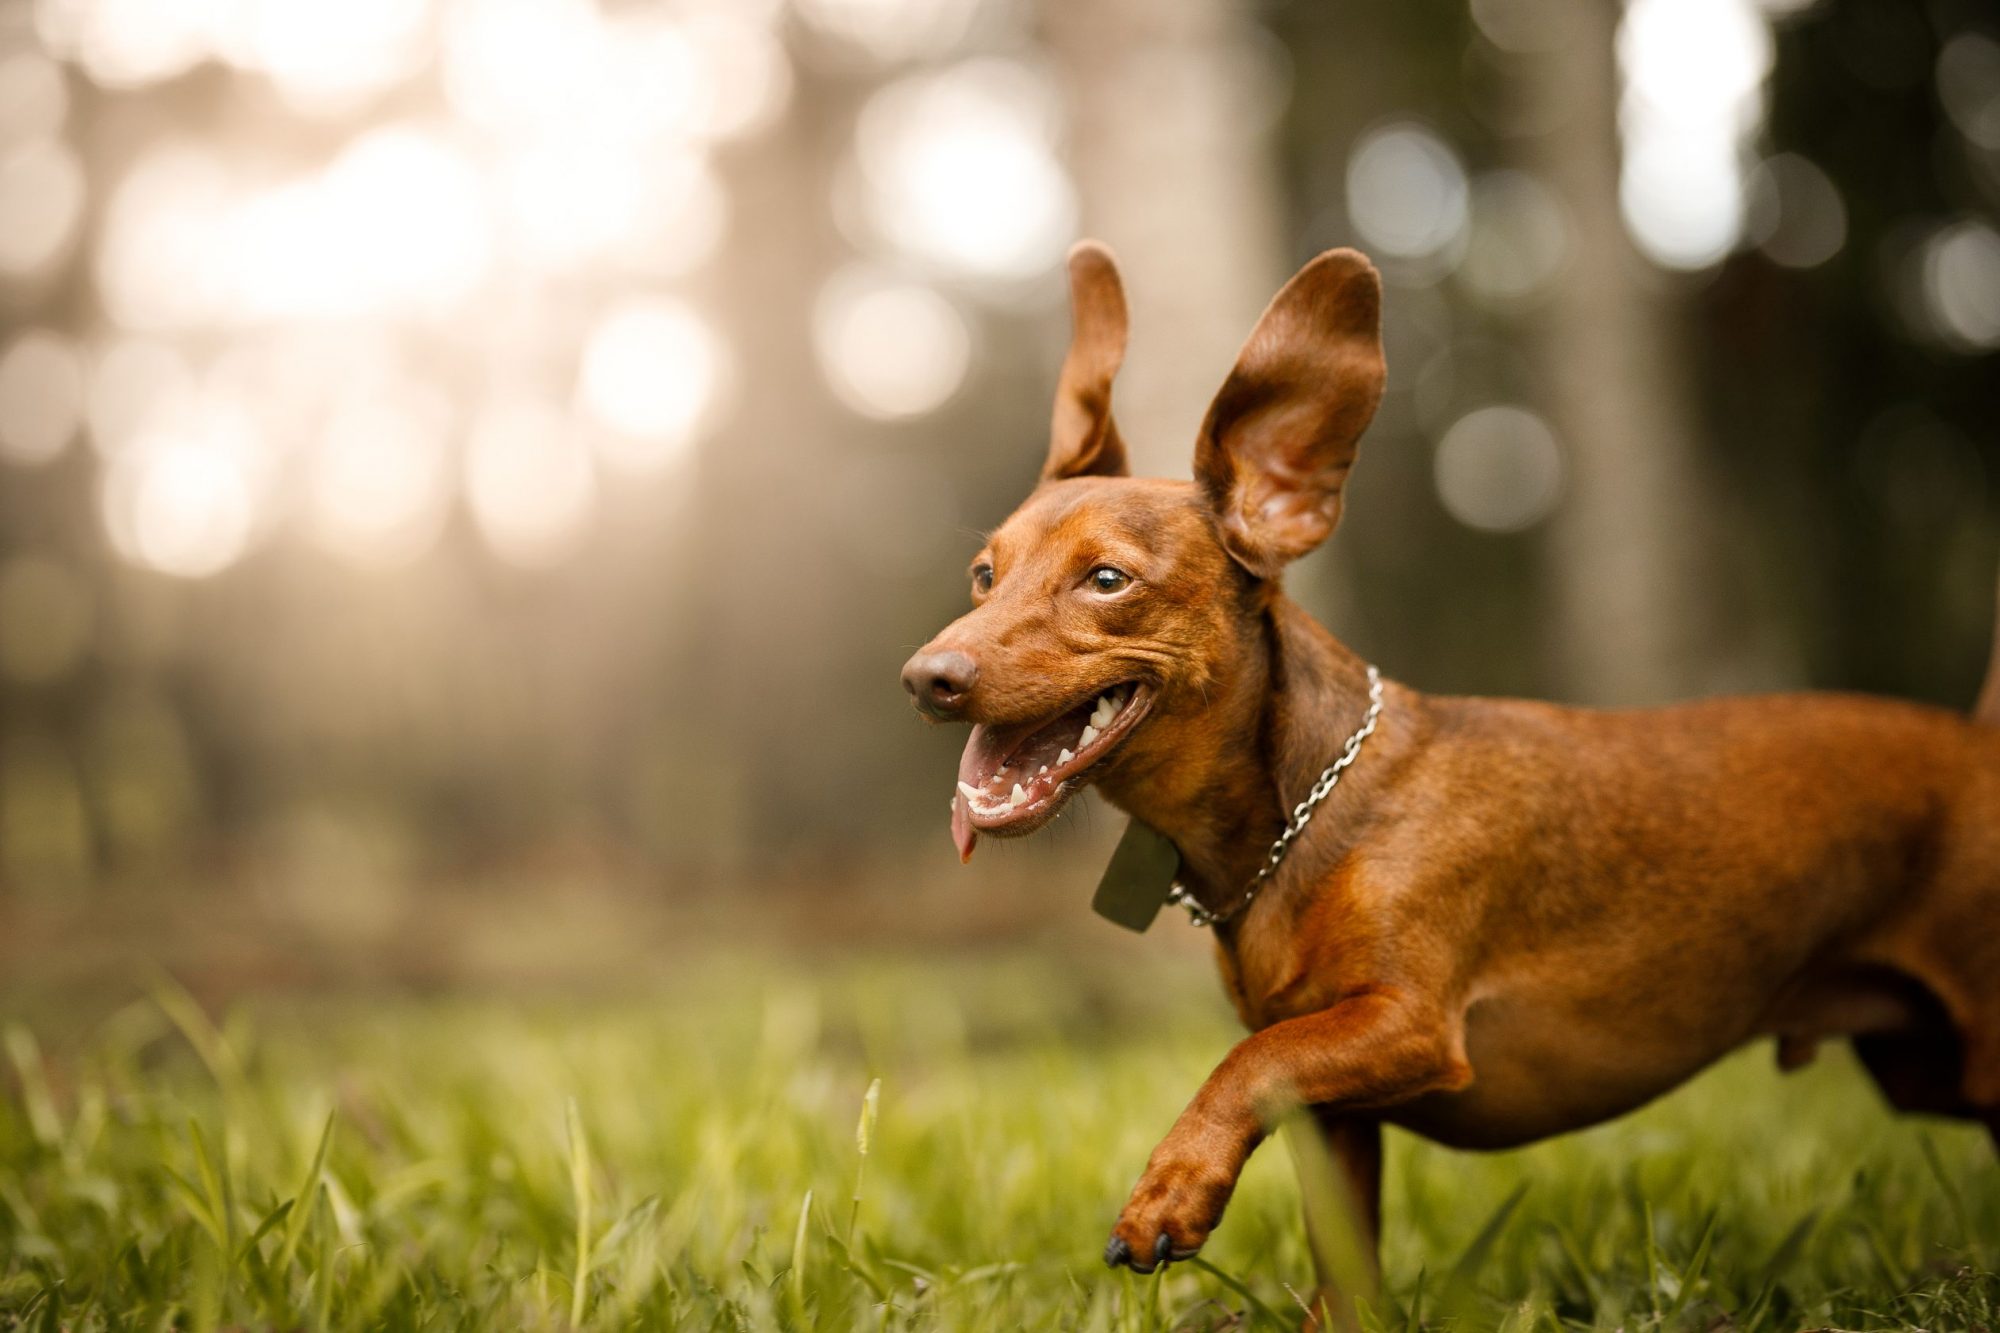 A dog with big ears running.